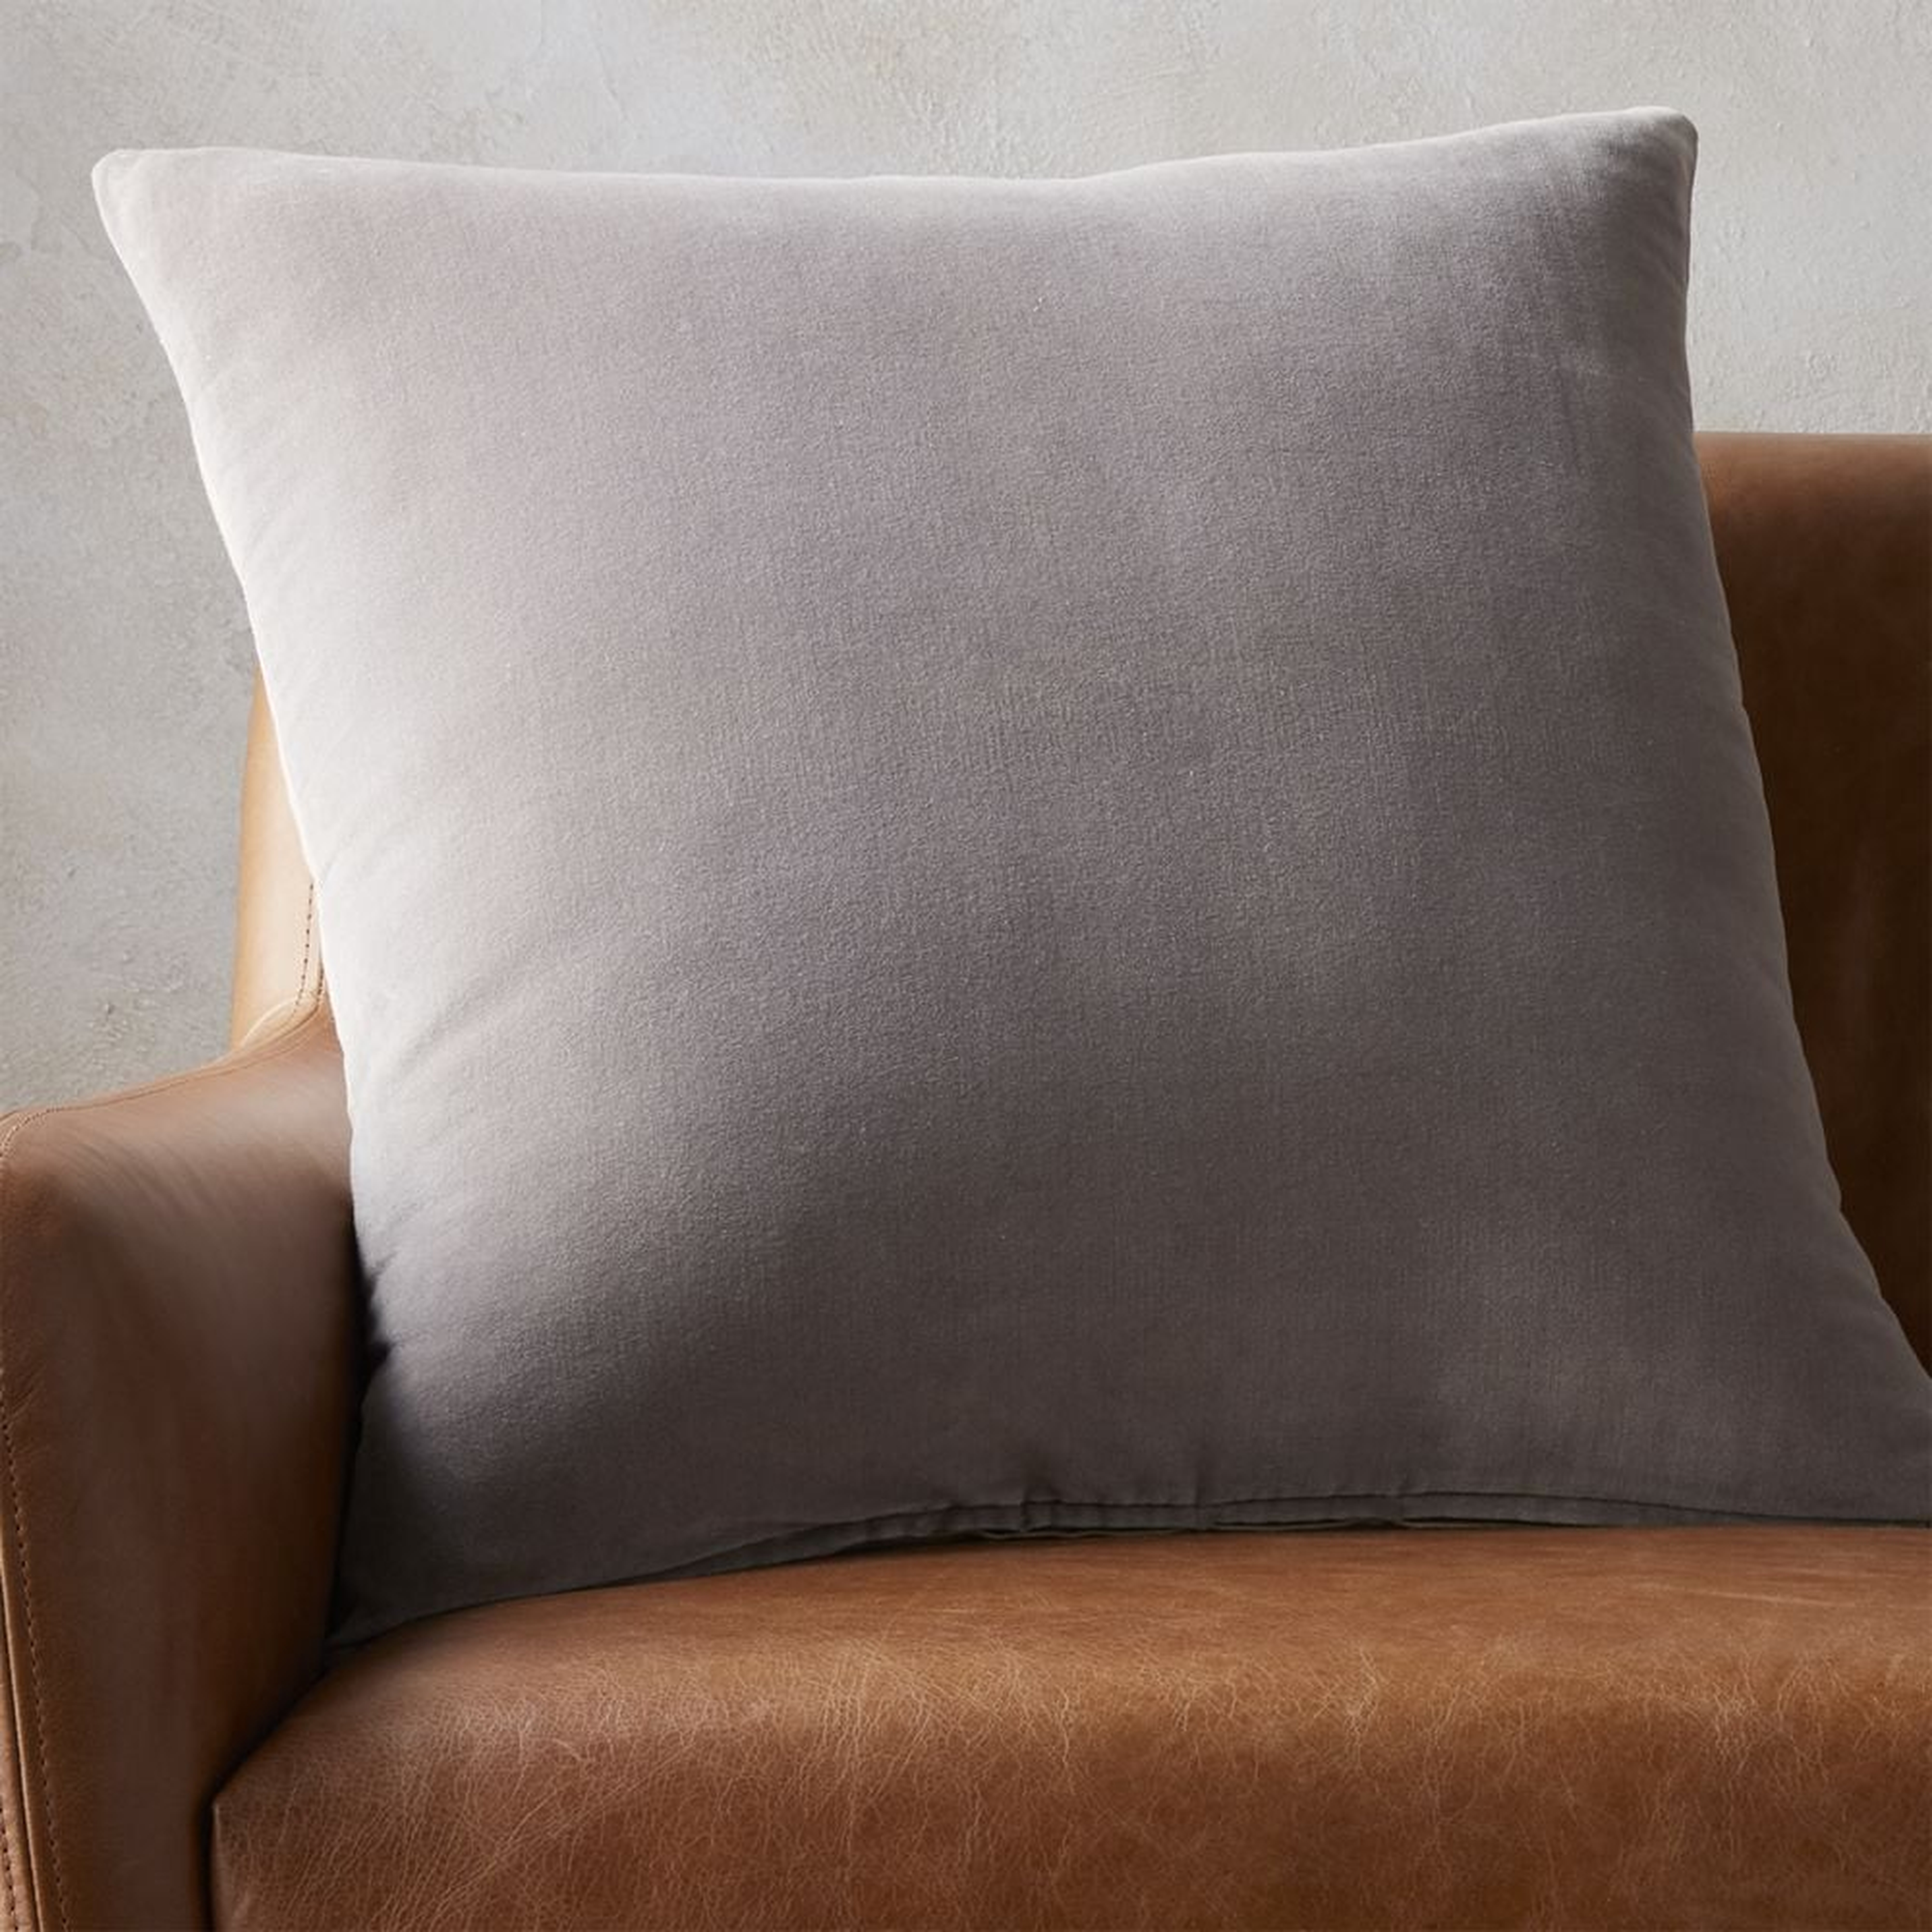 "23"" leisure grey pillow with down-alternative insert" - CB2